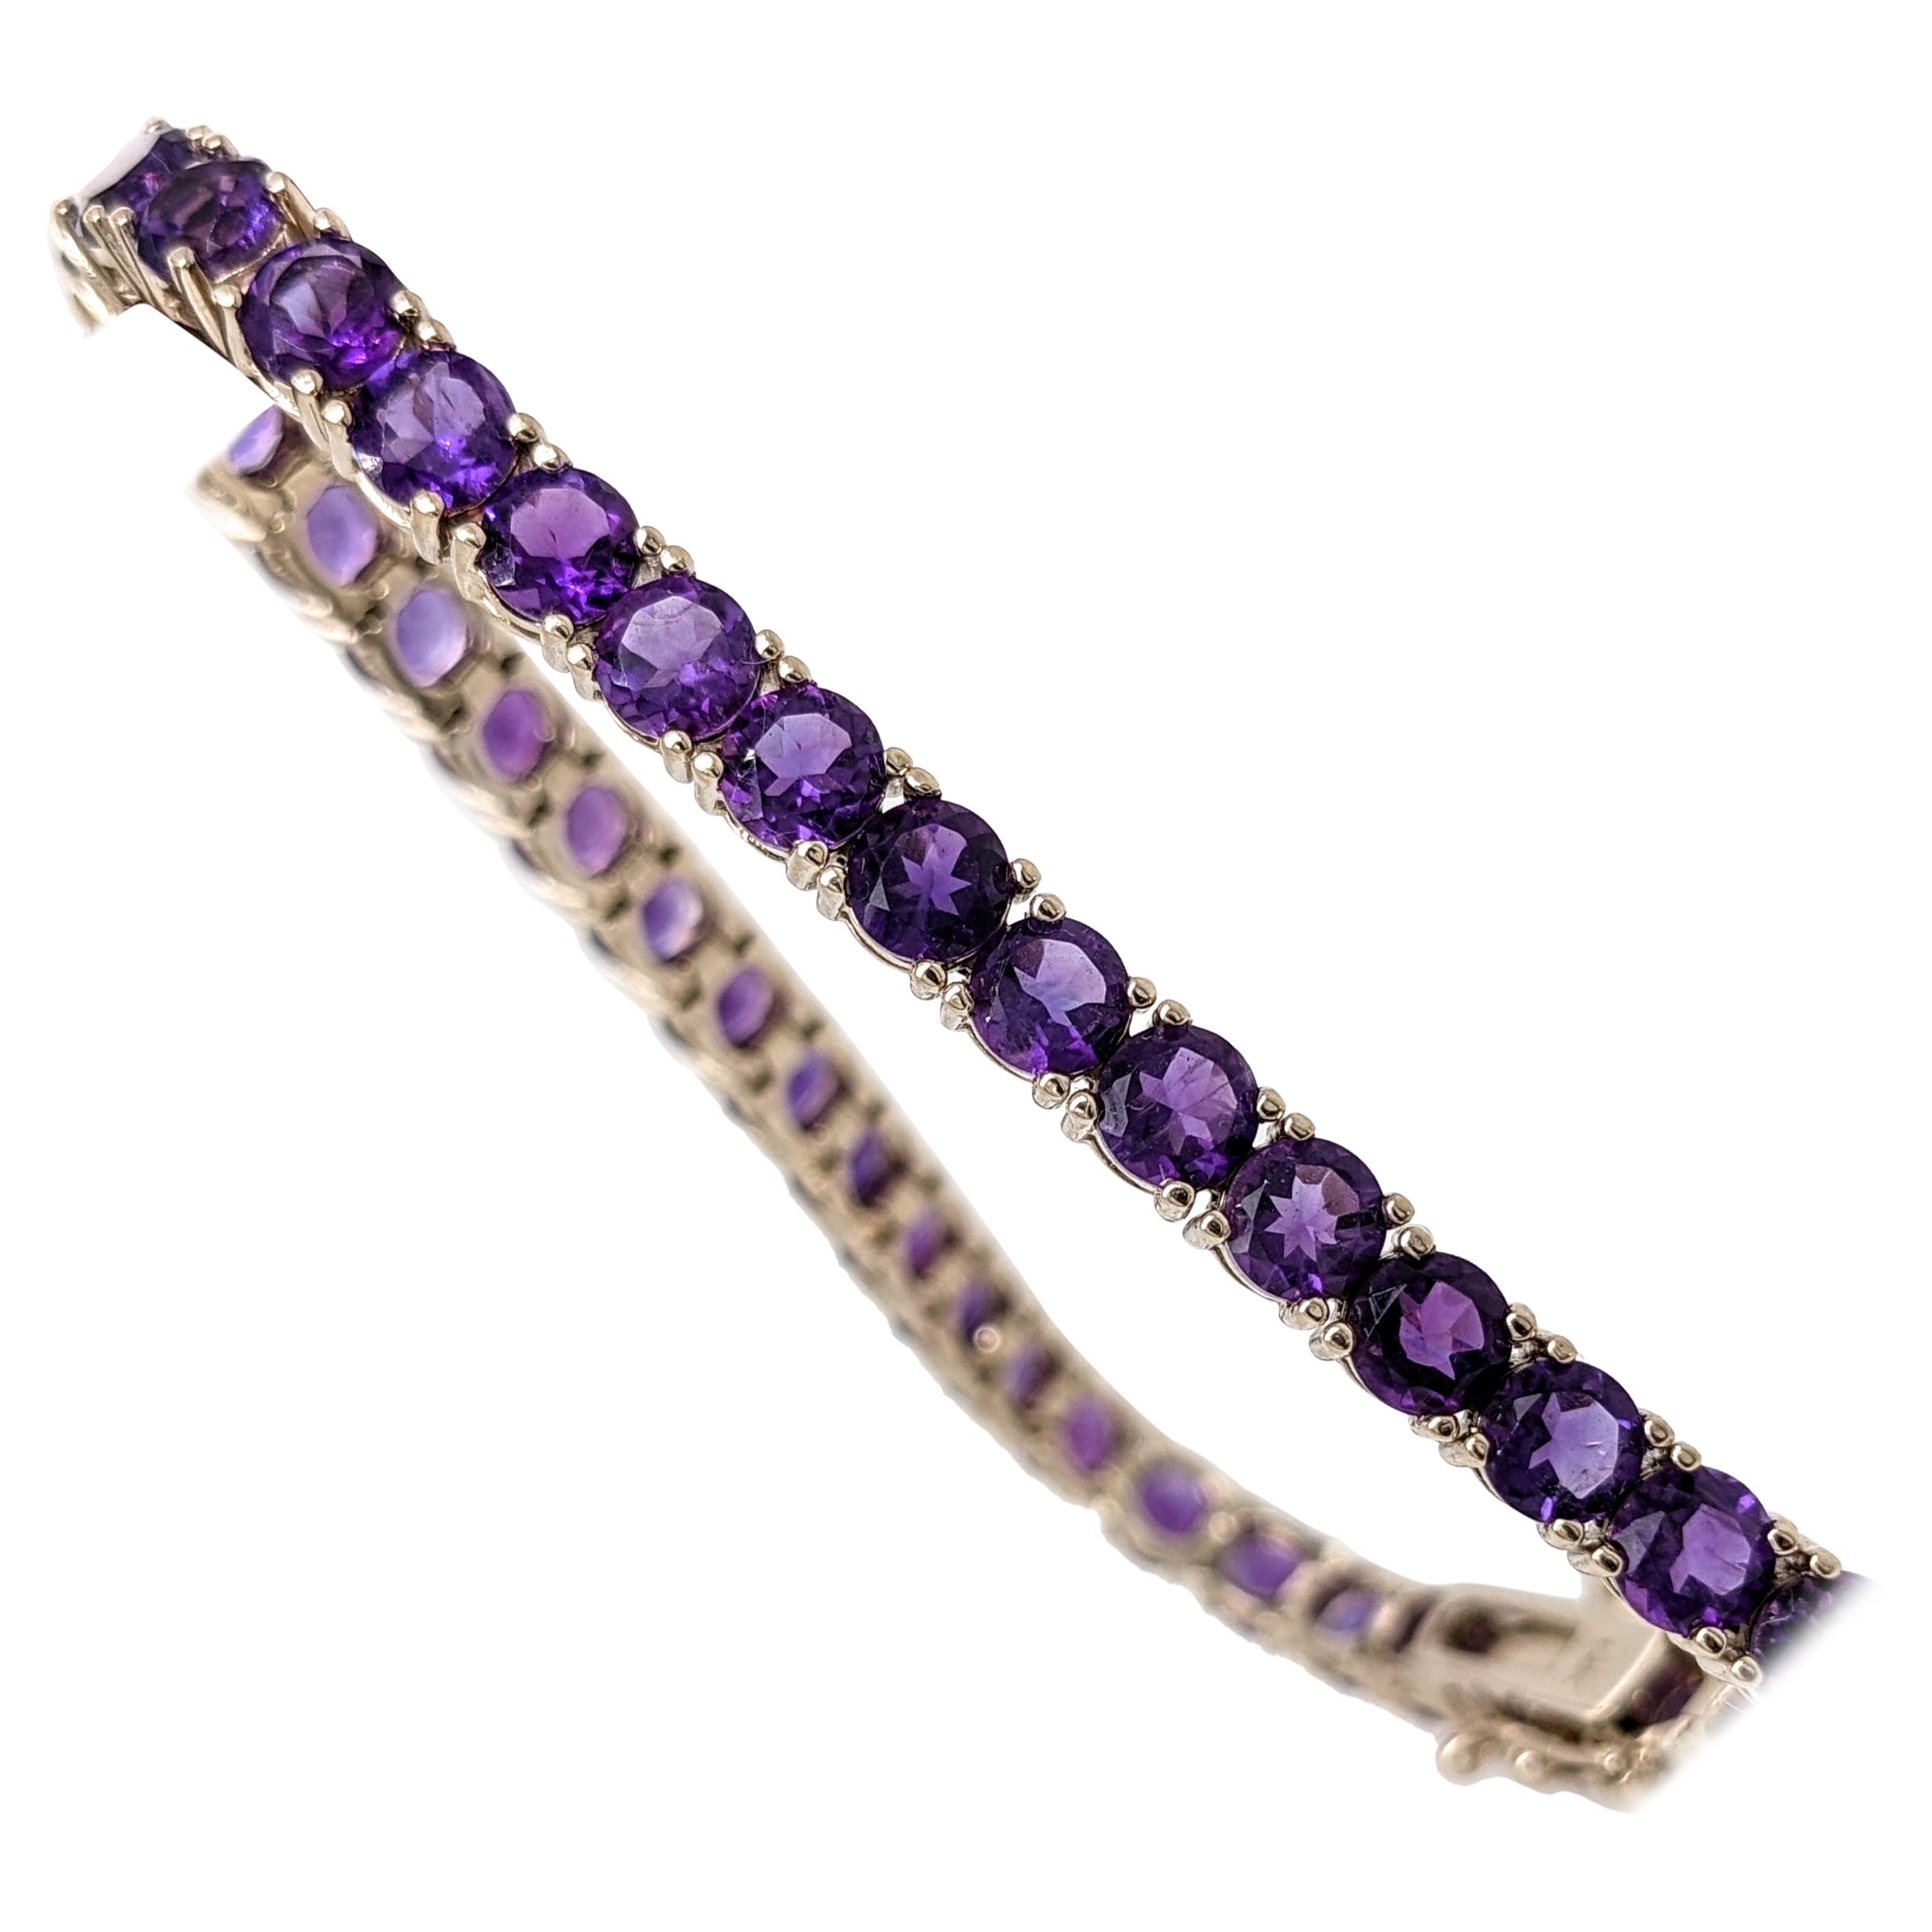 11.36ct Amethyst Tennis Bracelet in 14k White Gold Box Clasp Closure  For Sale